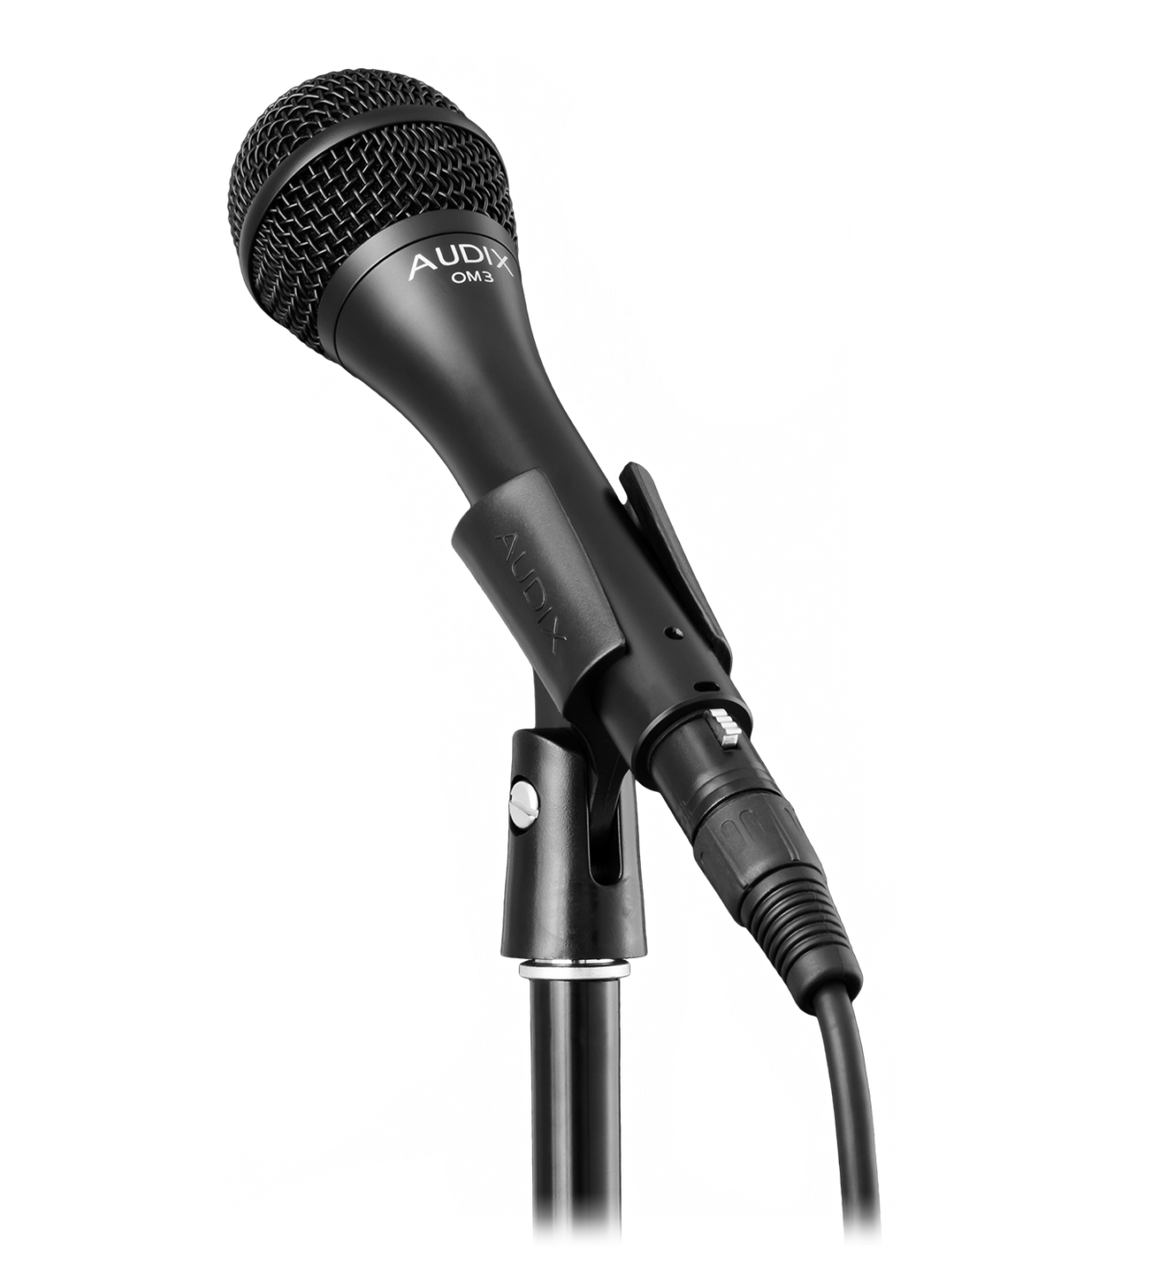 Audix OM3S Multi-Purpose Vocal And Instrument Dynamic Vocal Microphone 